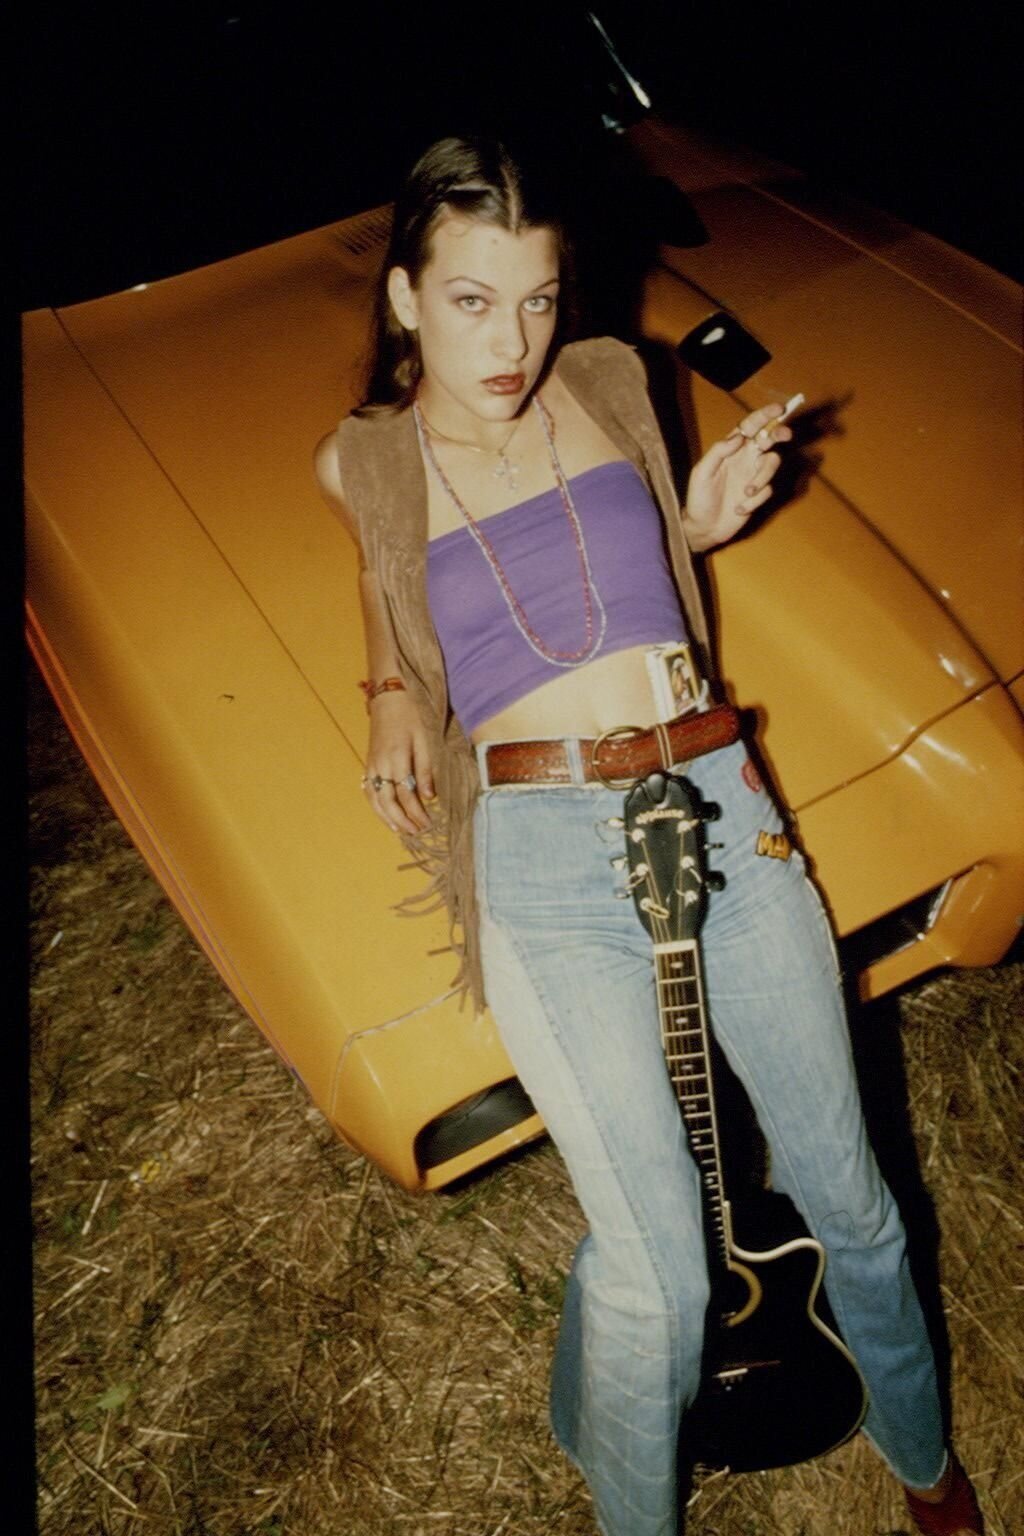 Milla Jovovich as Michelle Burroughs in Dazed and Confused